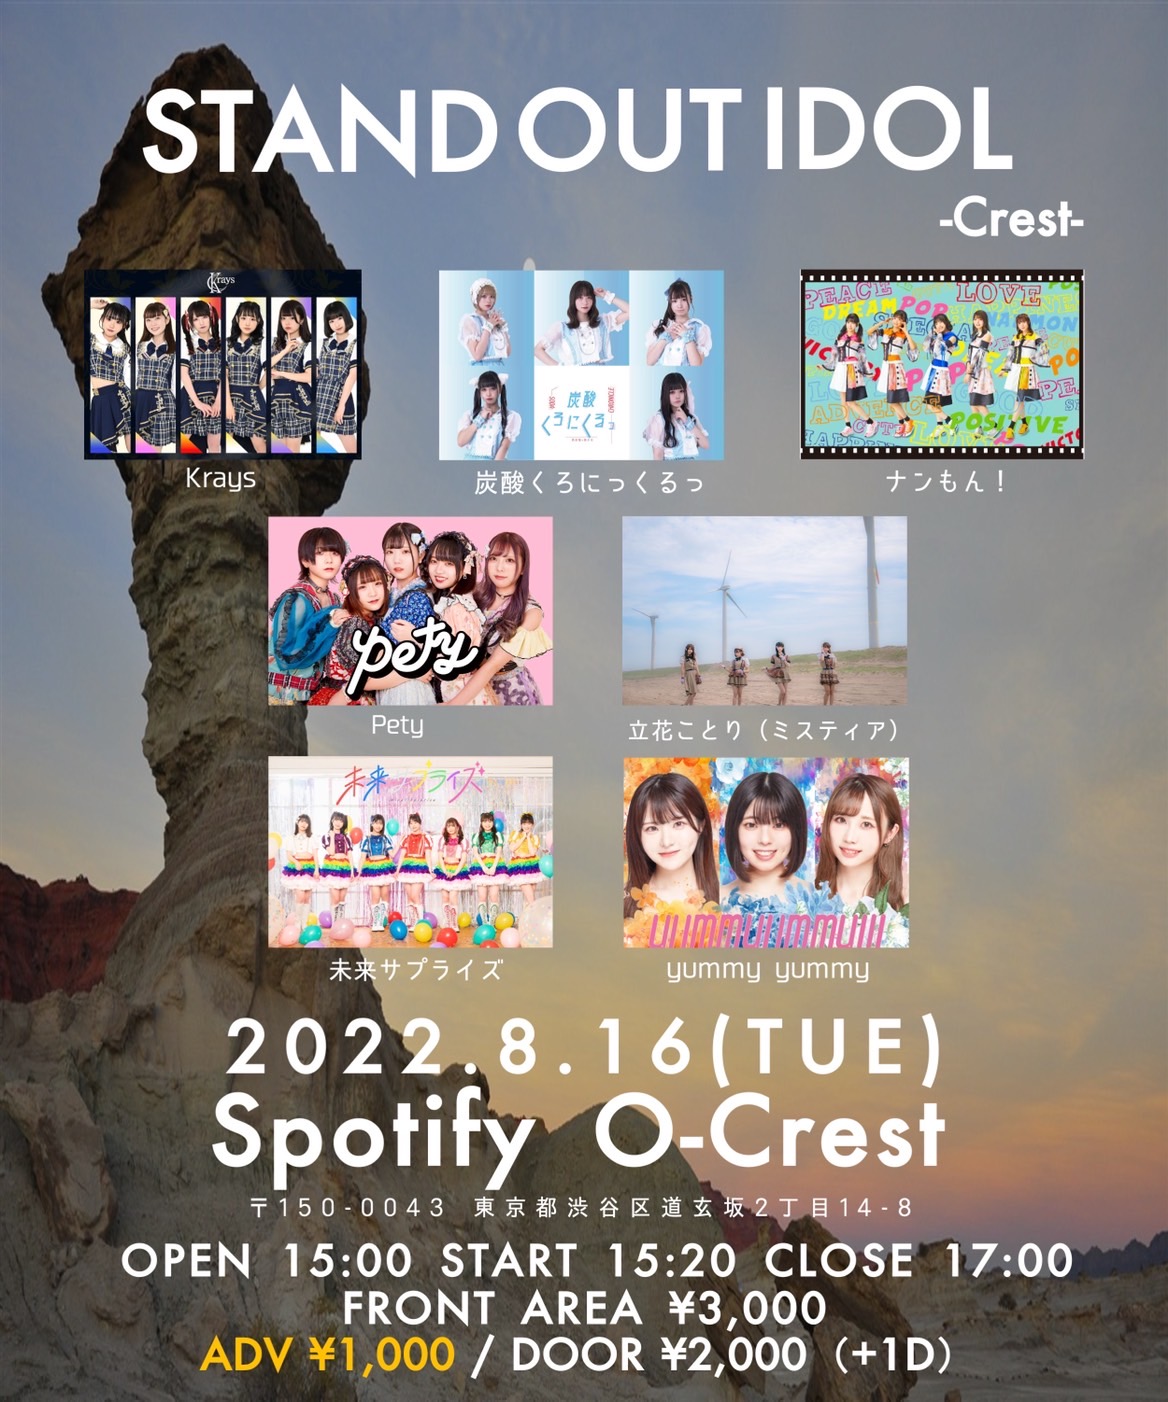 STAND OUT IDOL -Crest-